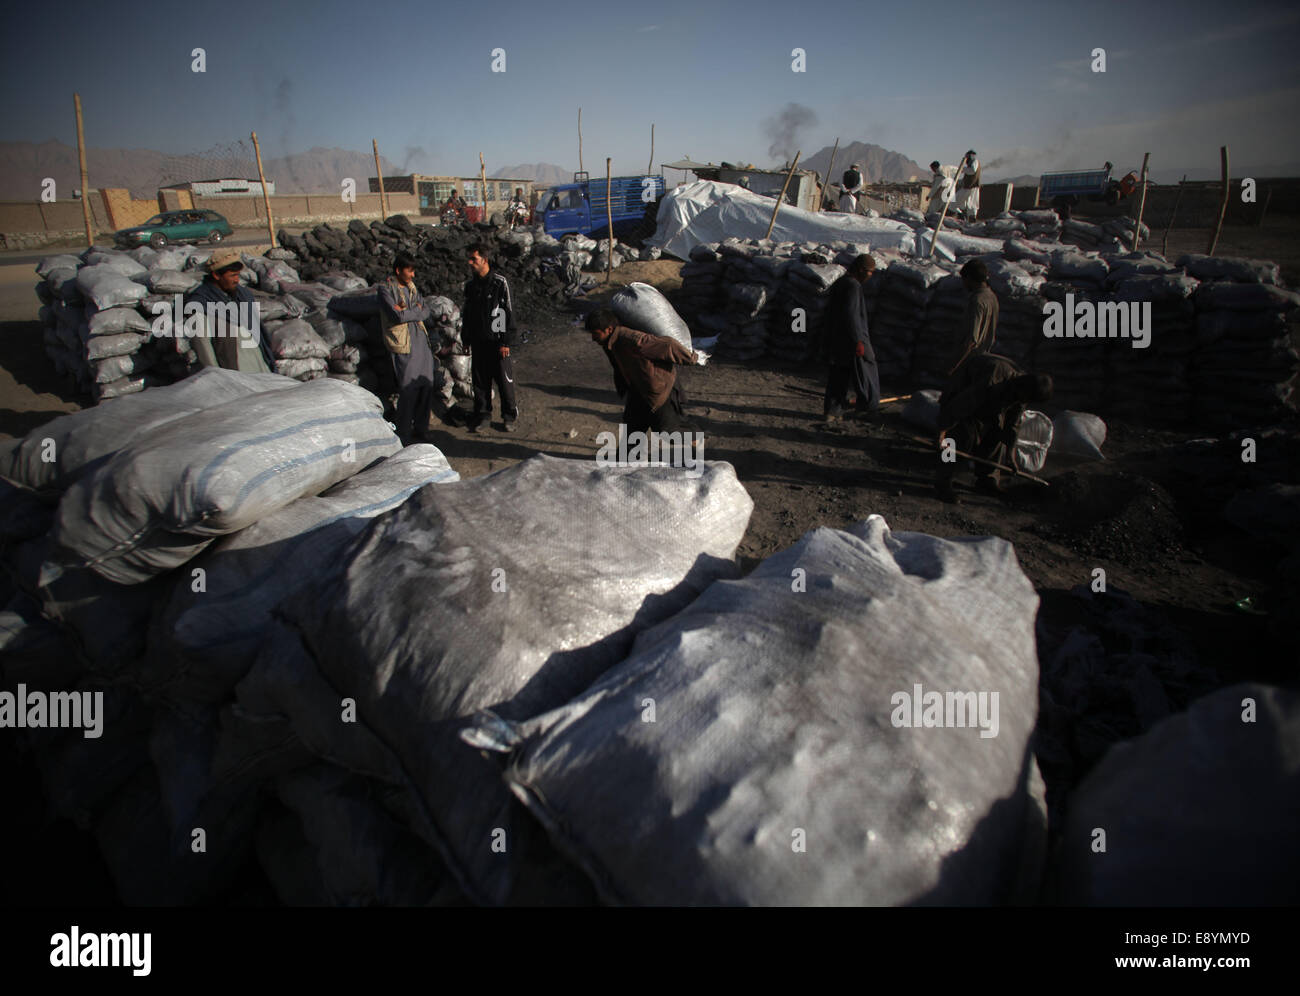 Kabul, Afghanistan. 16th Oct, 2014. Laboers work at a coal market in Kabul, Afghanistan, Oct. 16, 2014. Afghan people are preparing fuel for the upcoming winter. © Ahmad Massoud/Xinhua/Alamy Live News Stock Photo